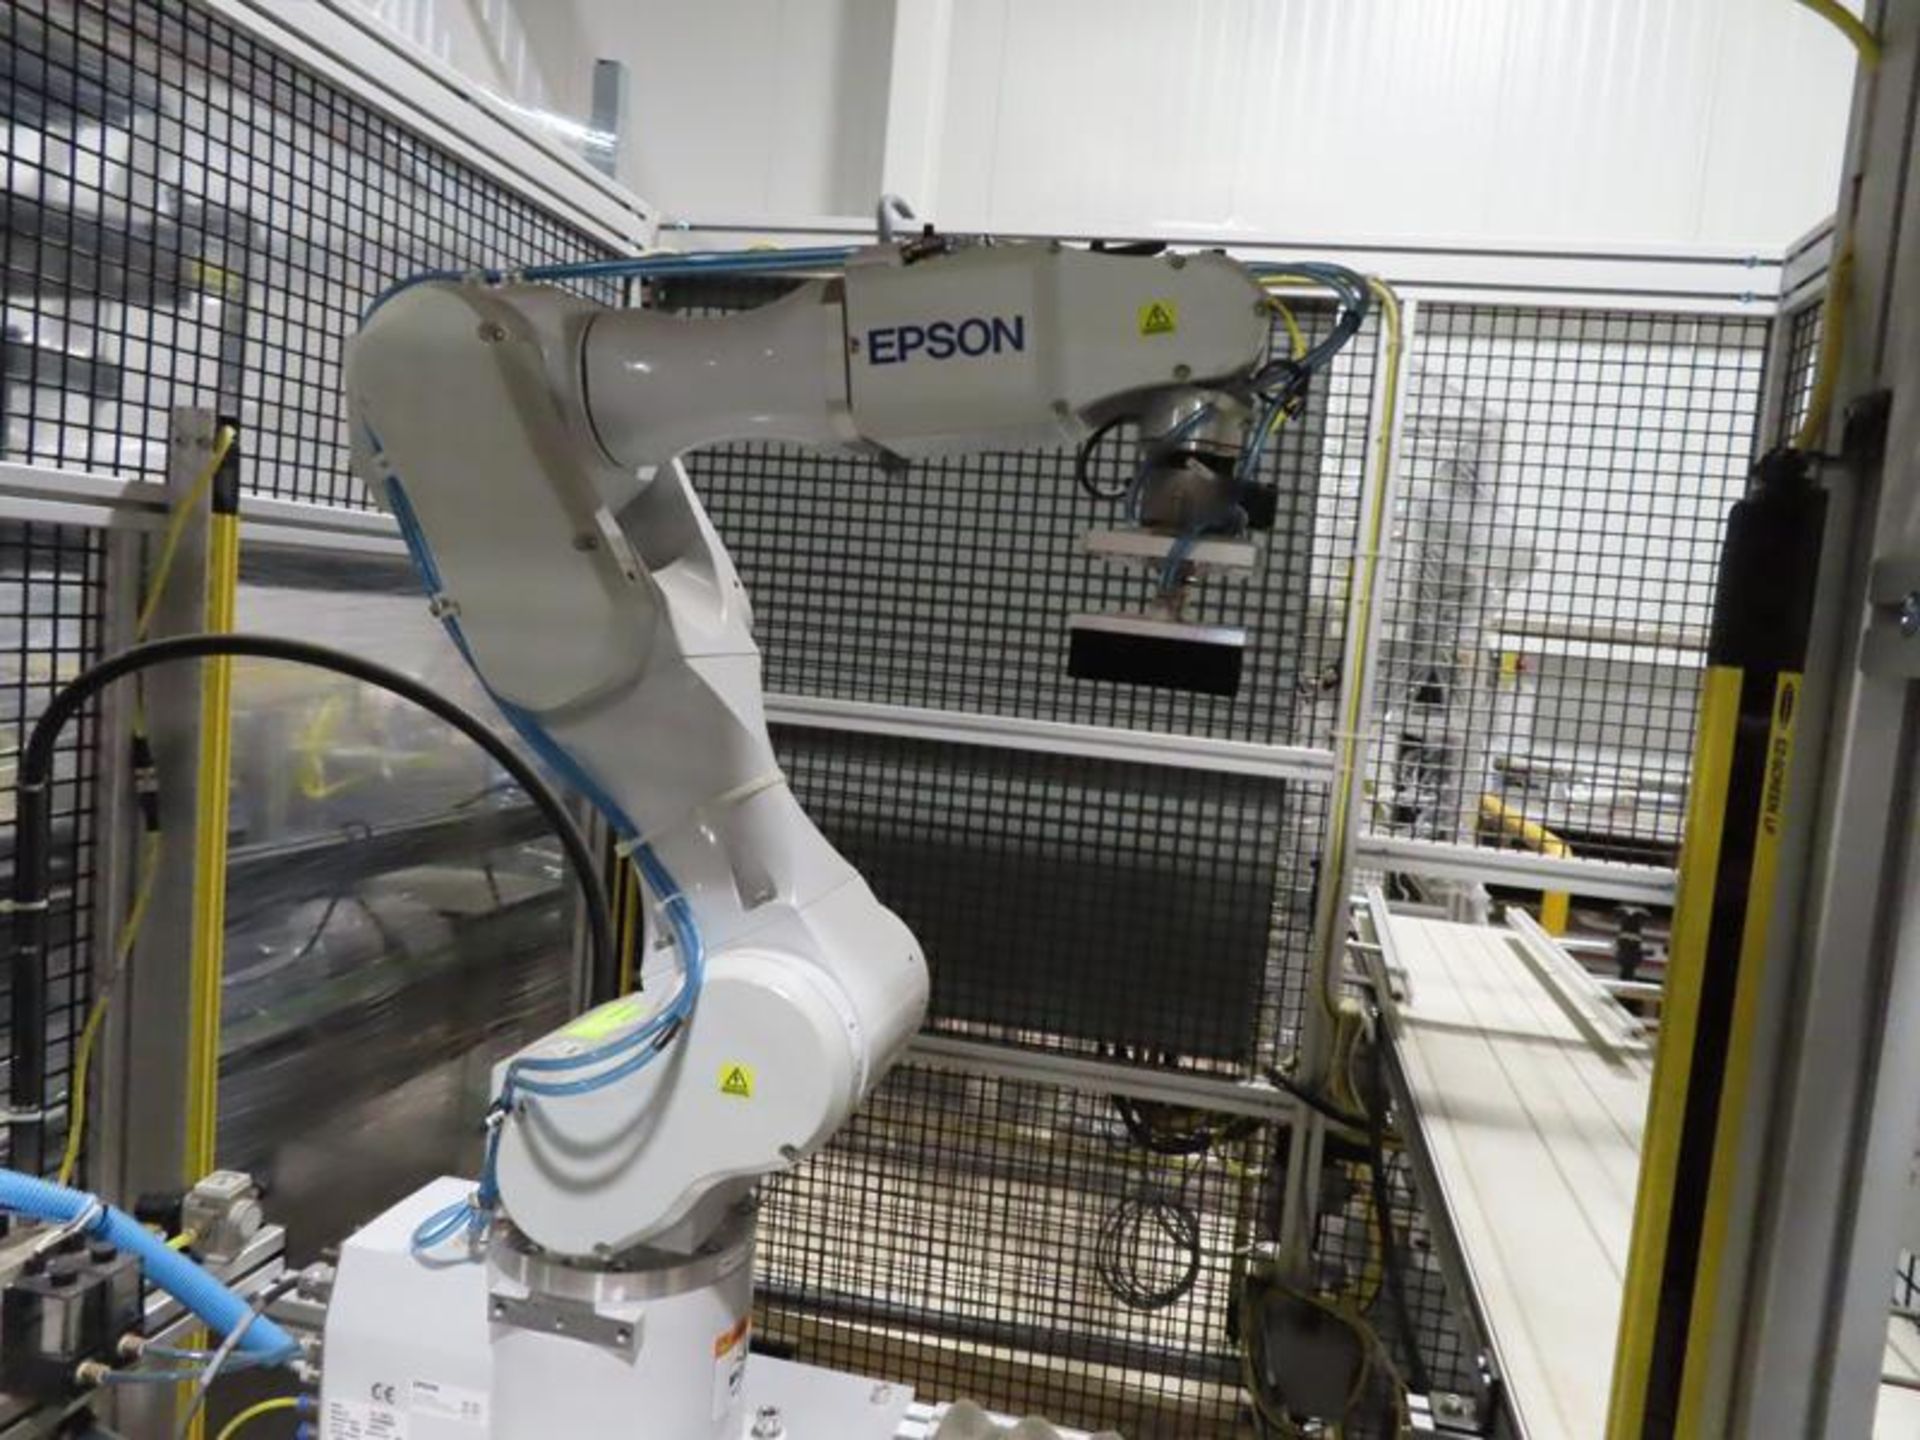 2013 Epson Model C4-A901S Robot with Safety Cell (approx 4.5ft x 6ft) - Image 2 of 4